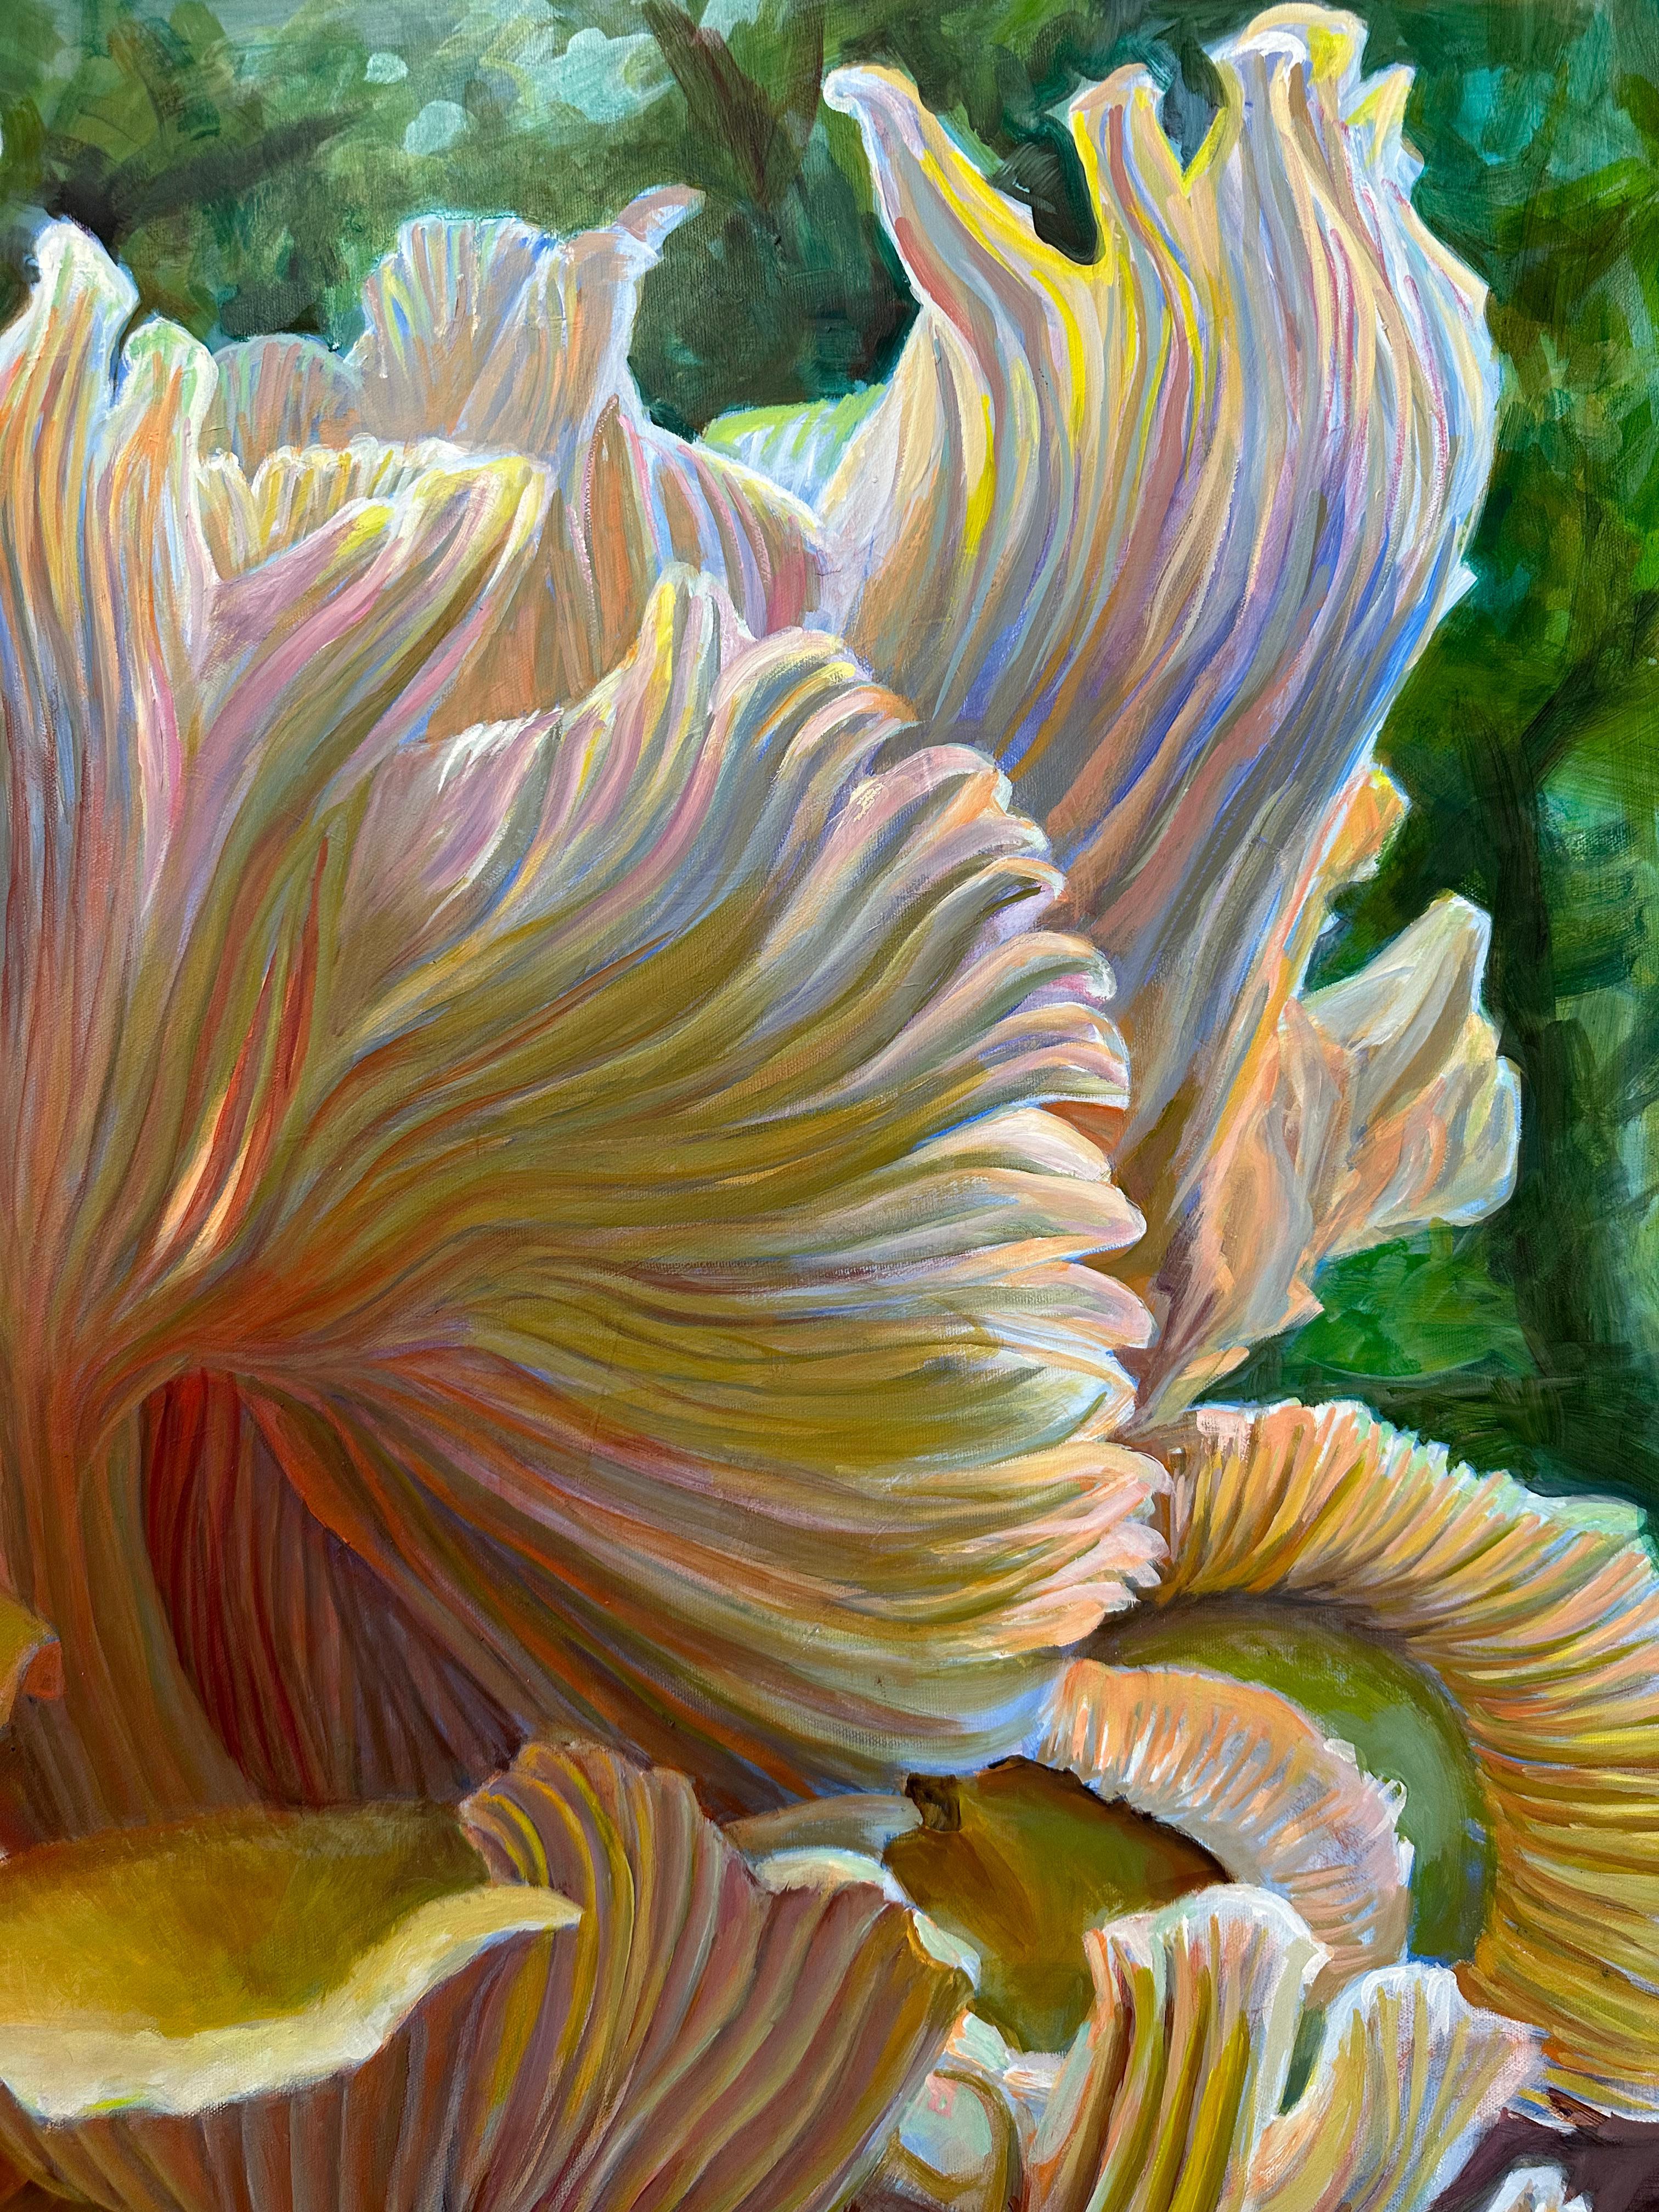 Golden Oysters One, Mushroom Fungi Still Life Painting, Yellow, Peach, Green For Sale 7